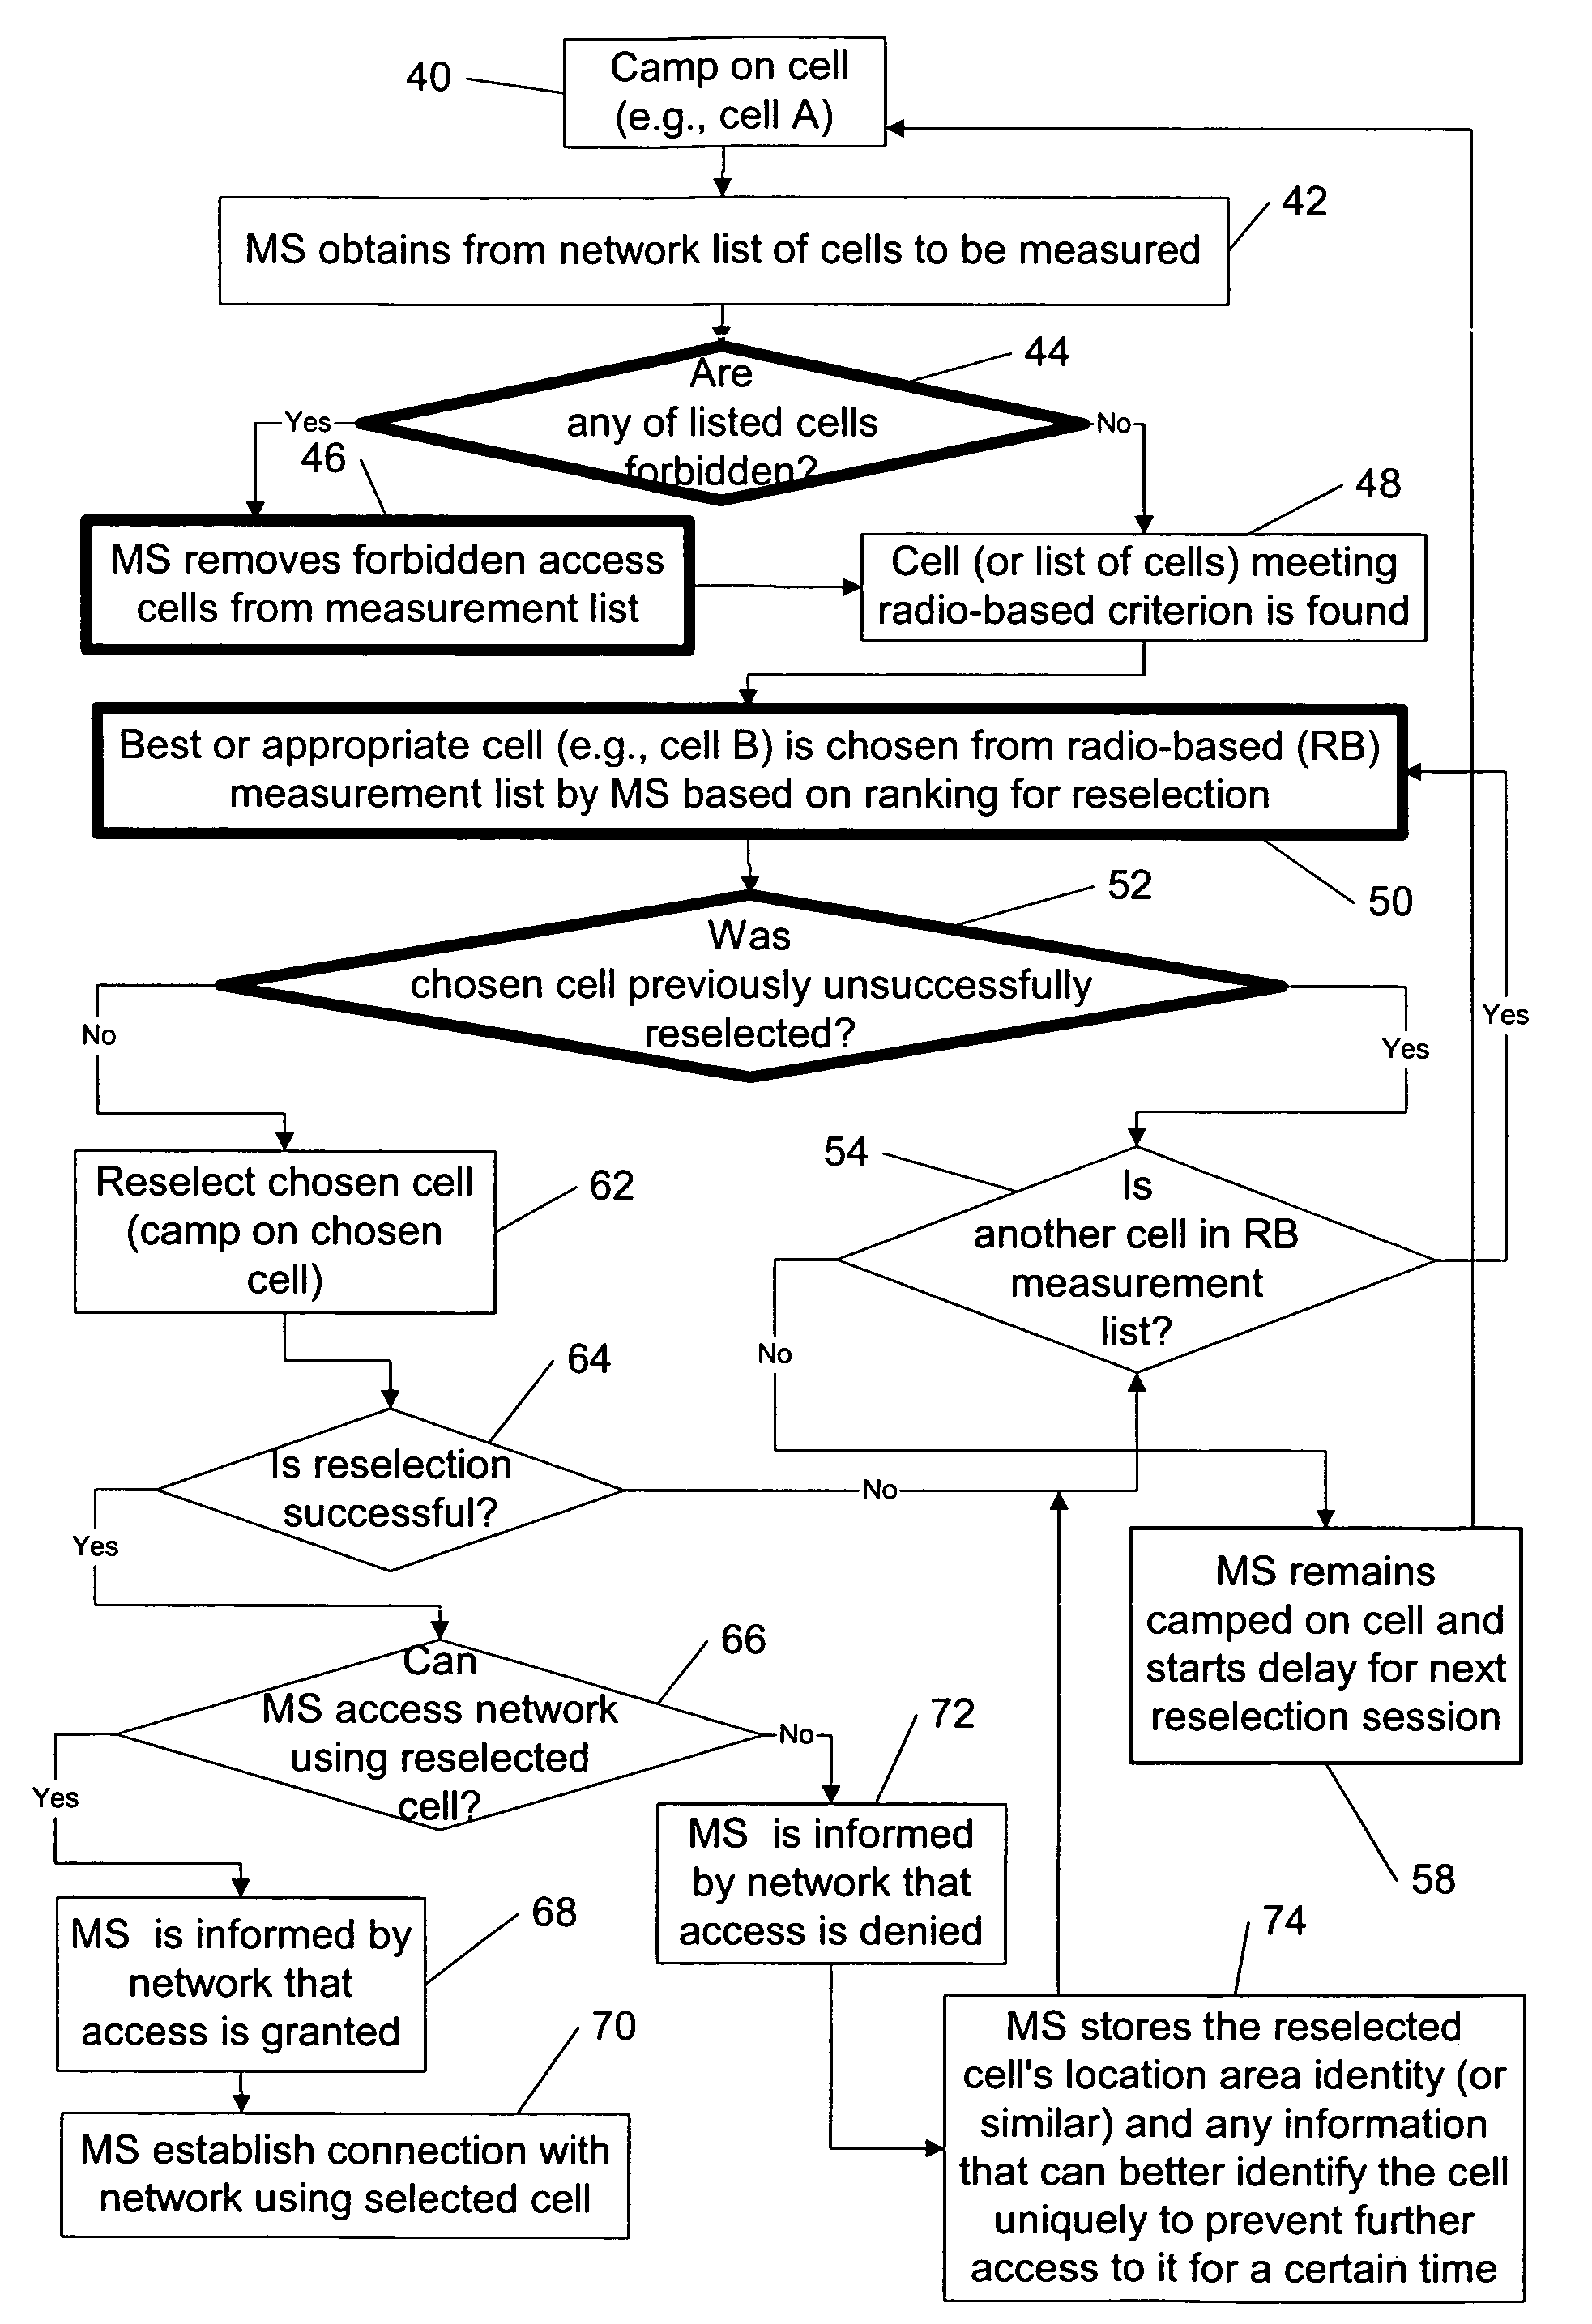 Cell reselection for improving network interconnection